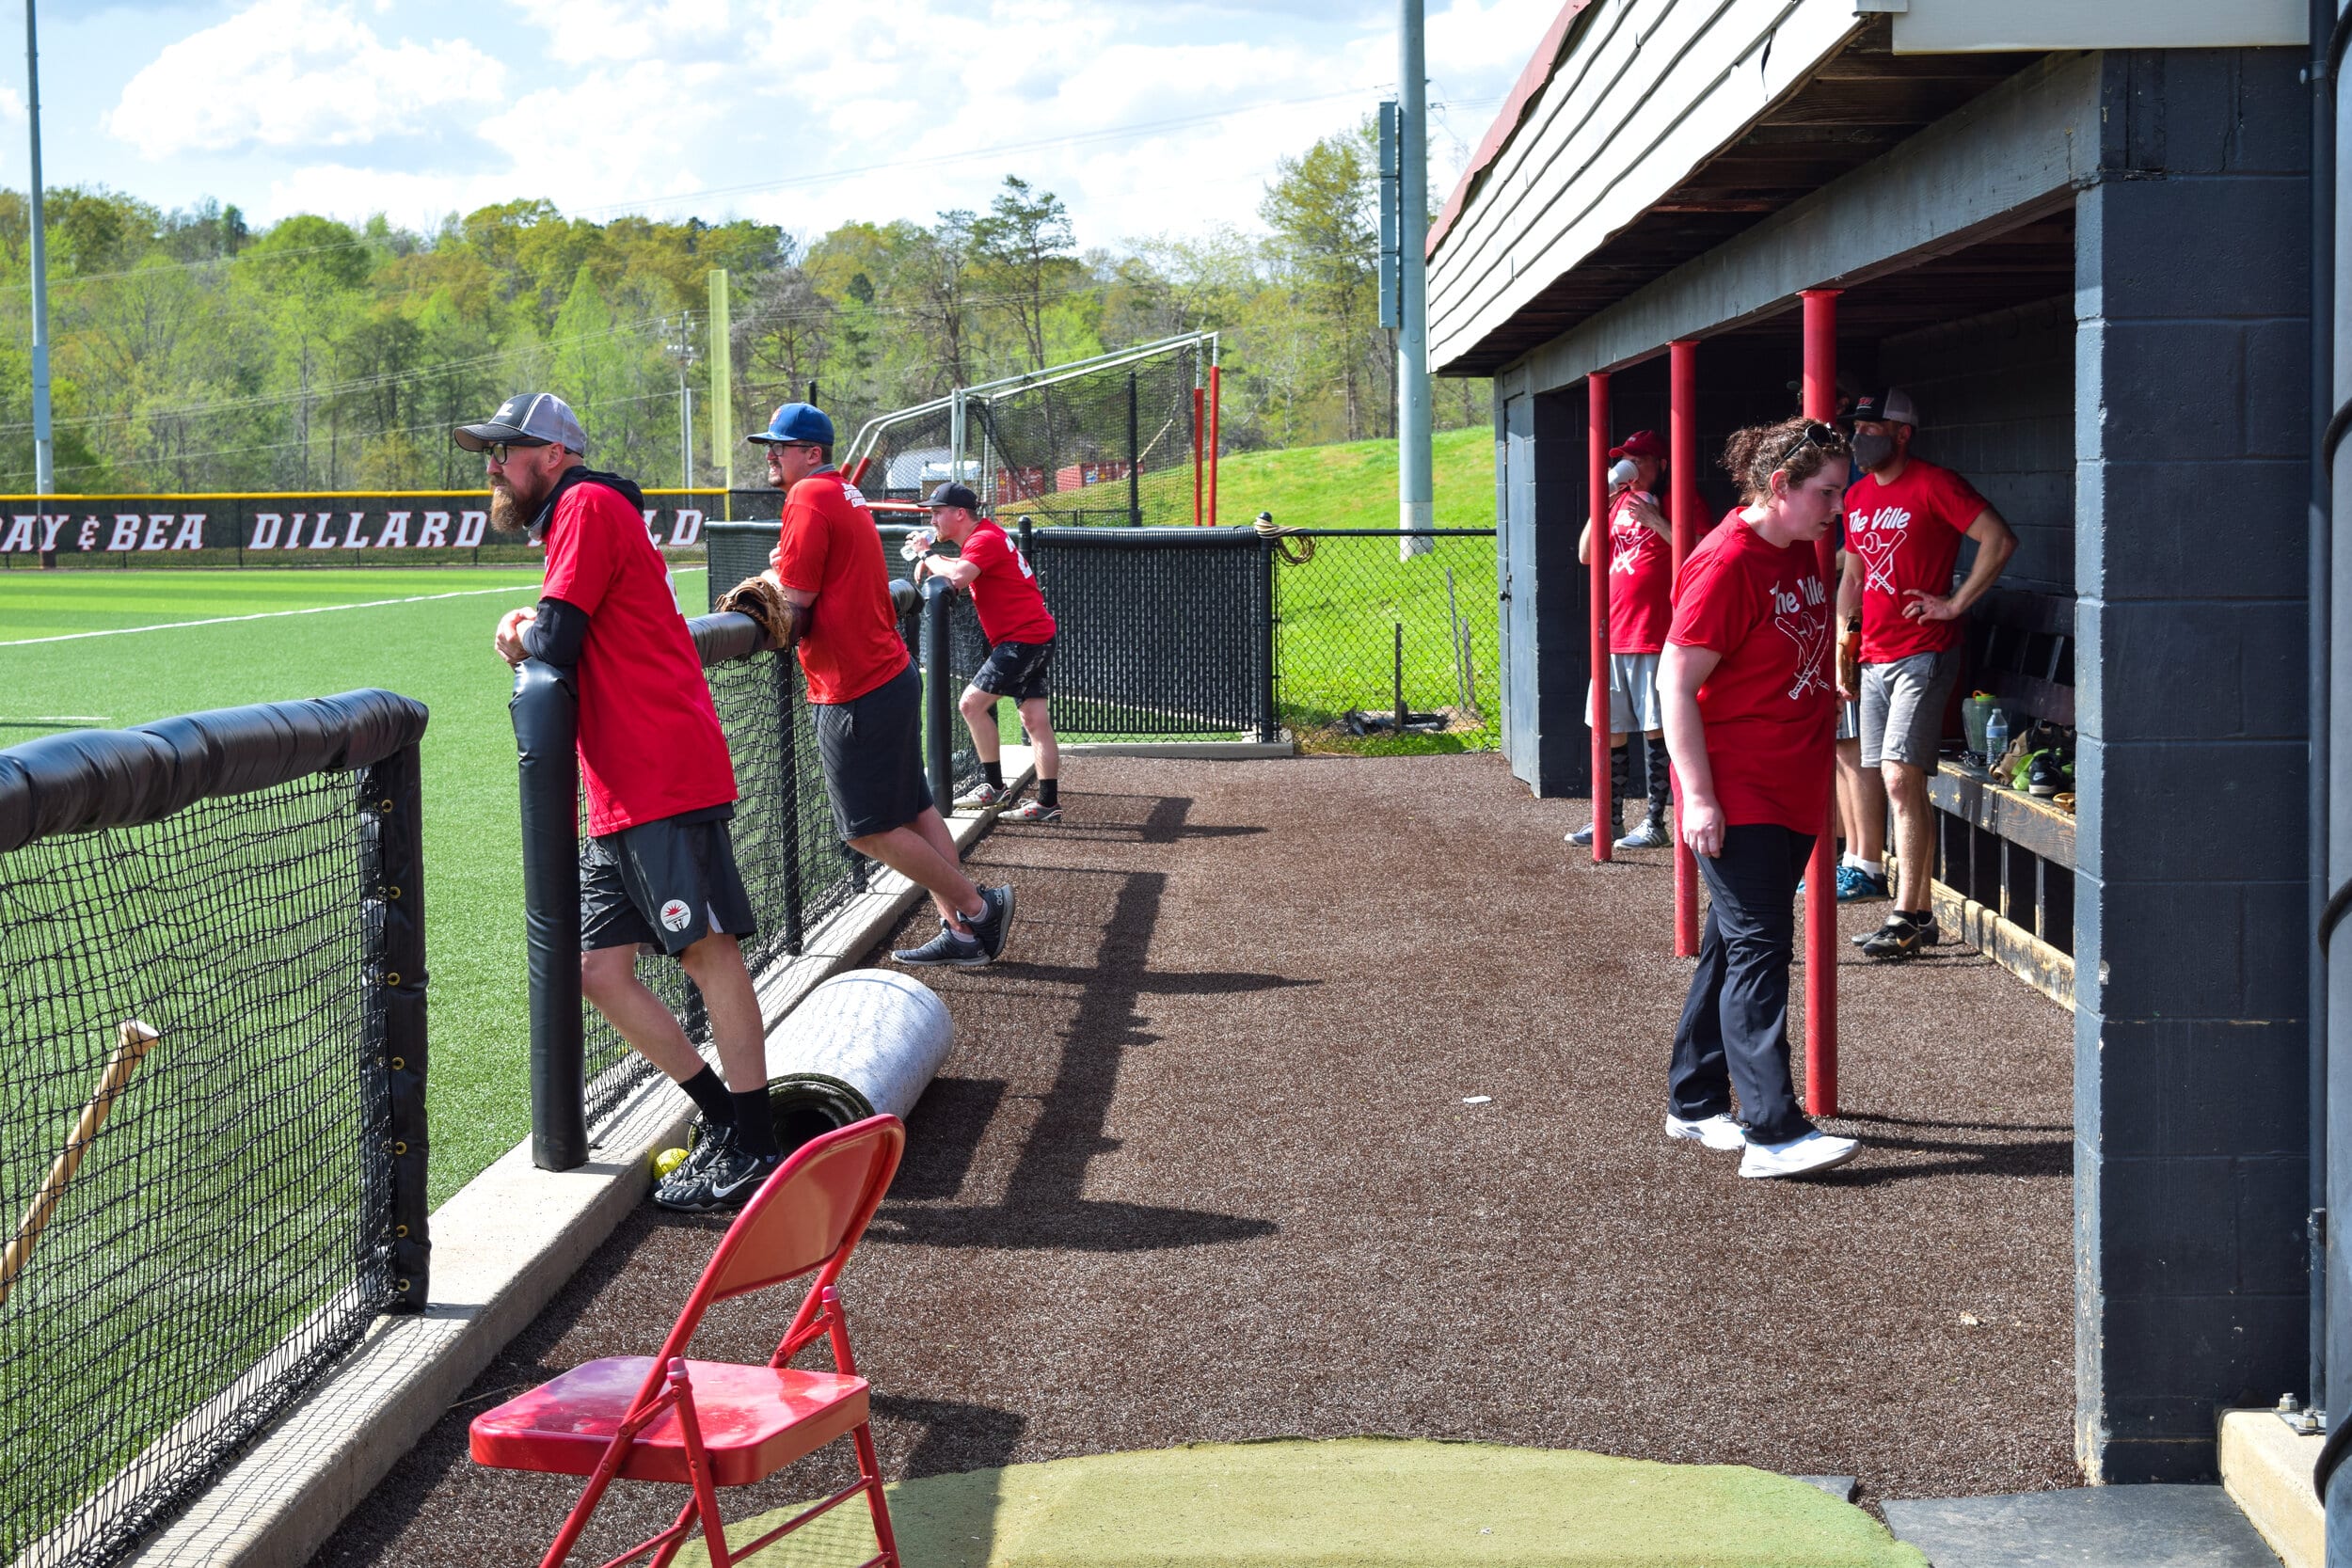 Some of the faculty members watch their teammates from the dugout.